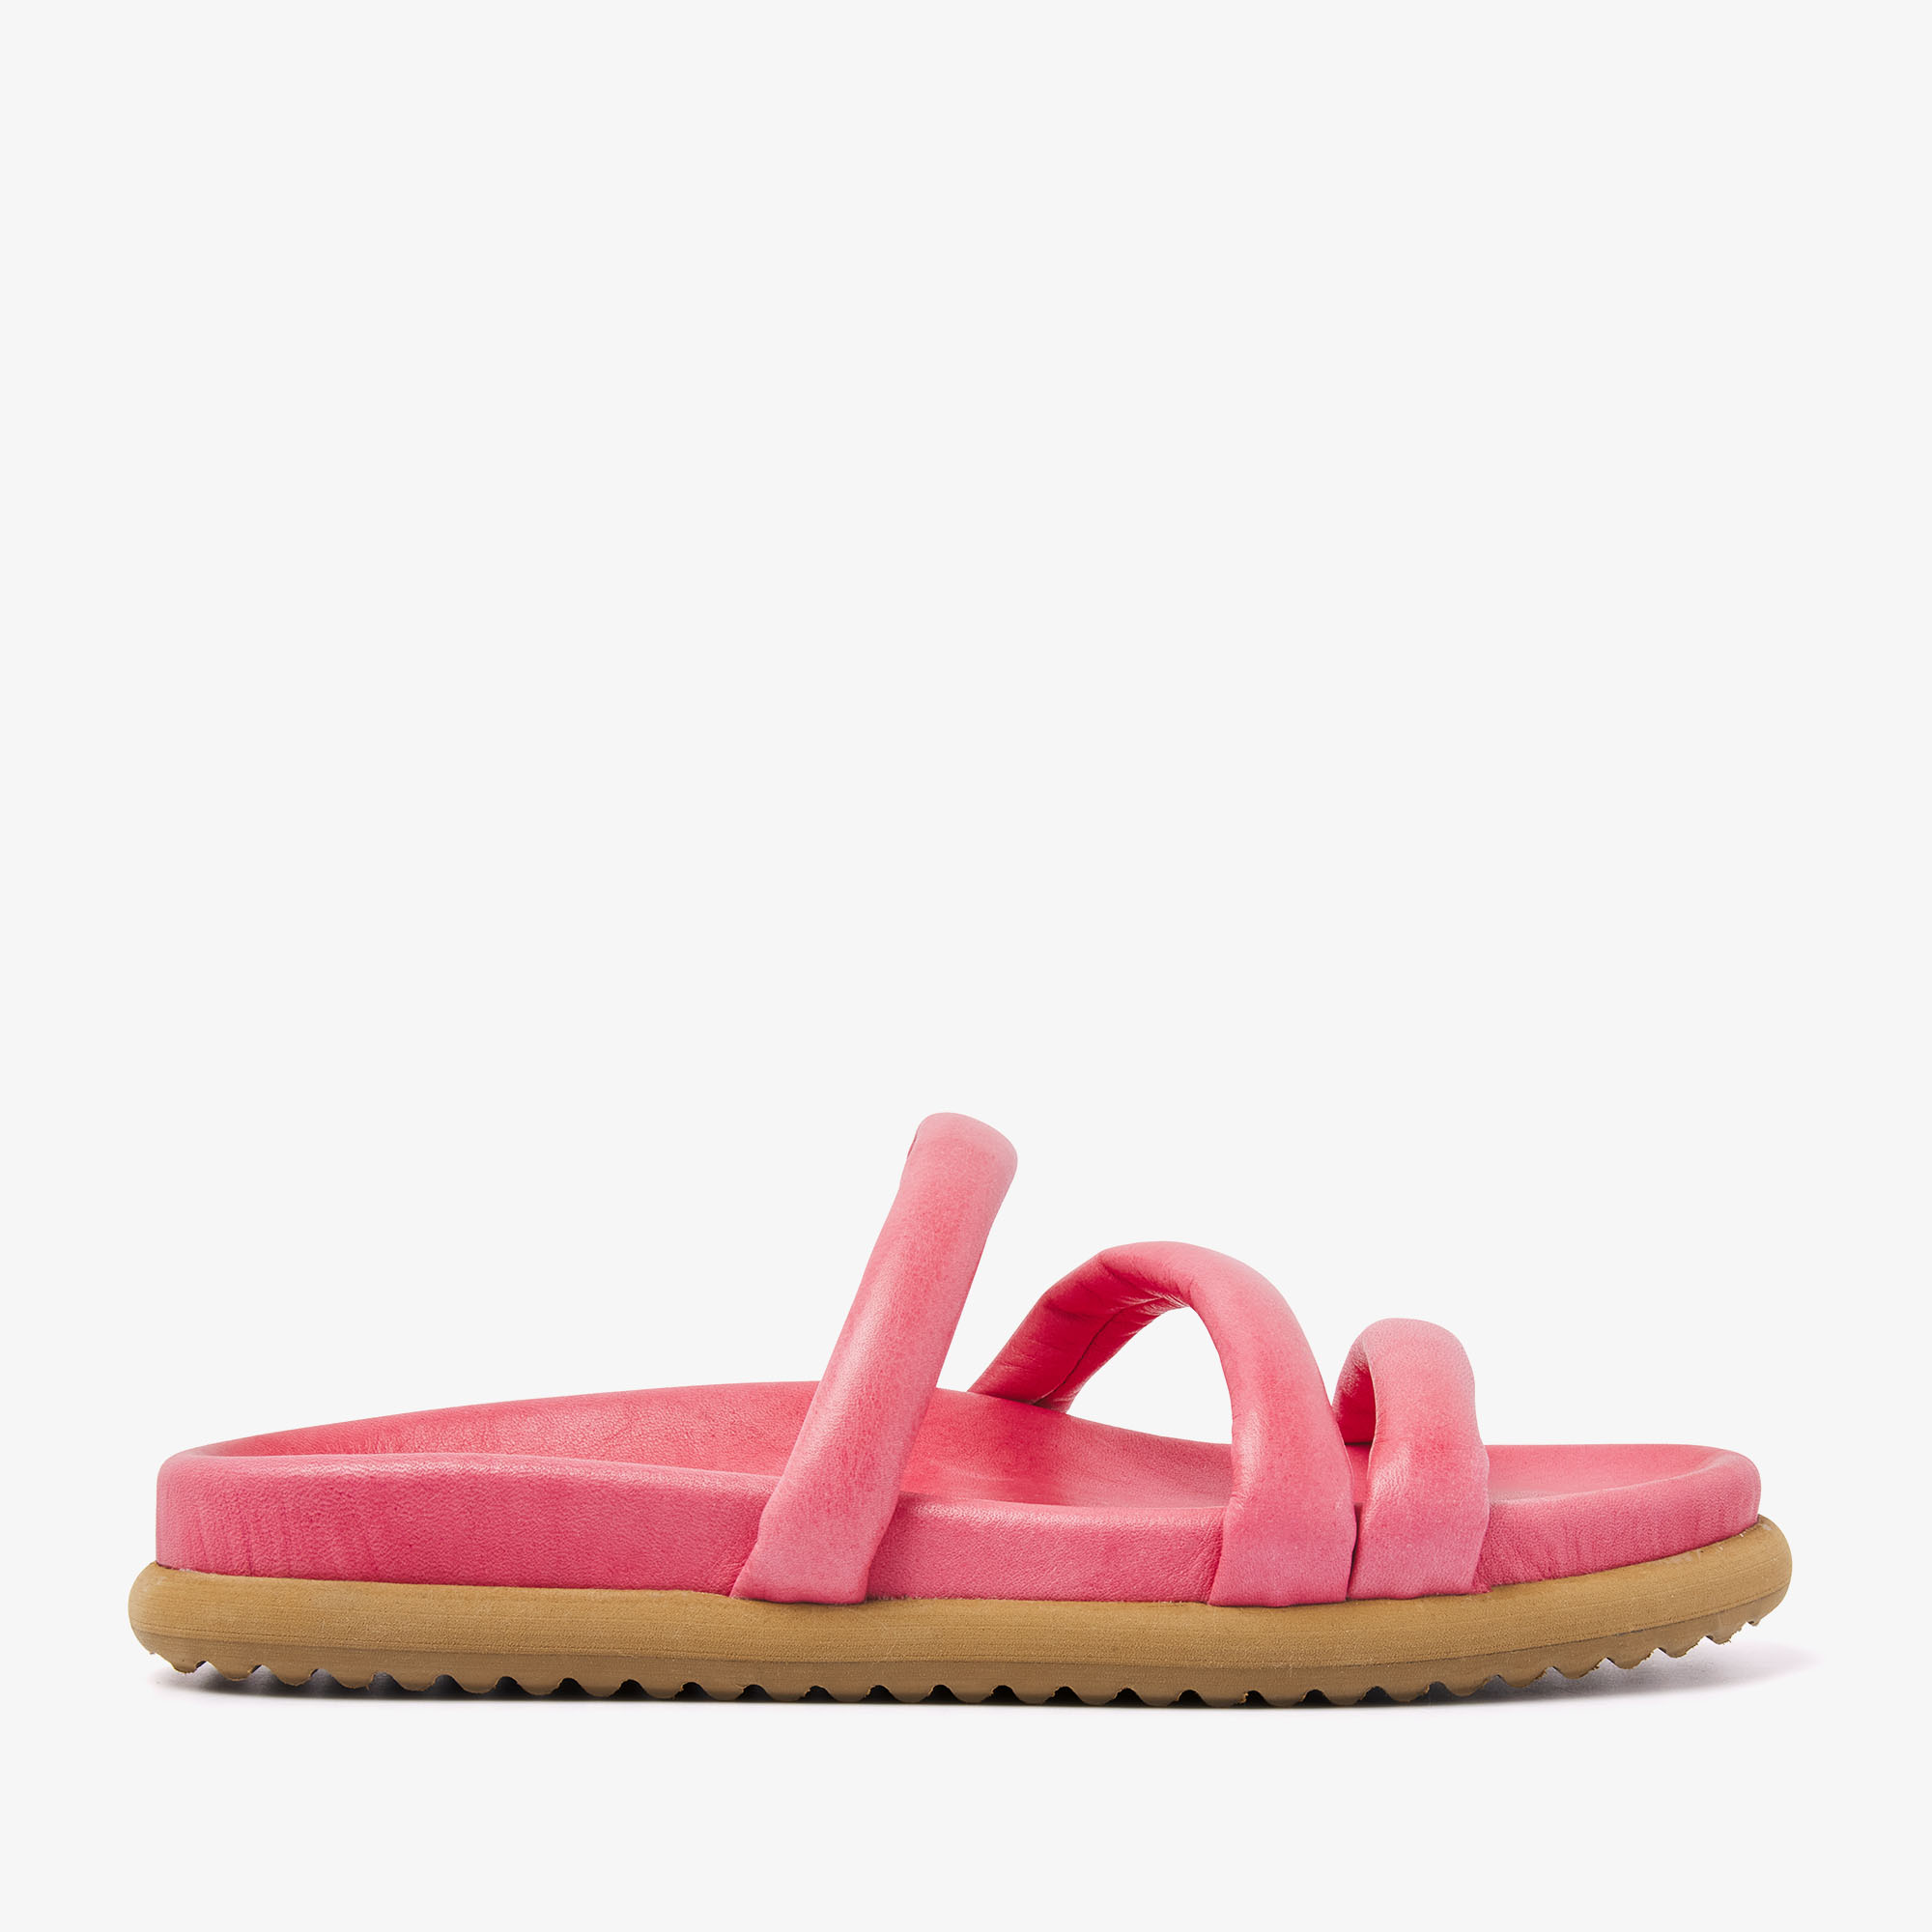 VIA VAI Candy Pop pink slippers